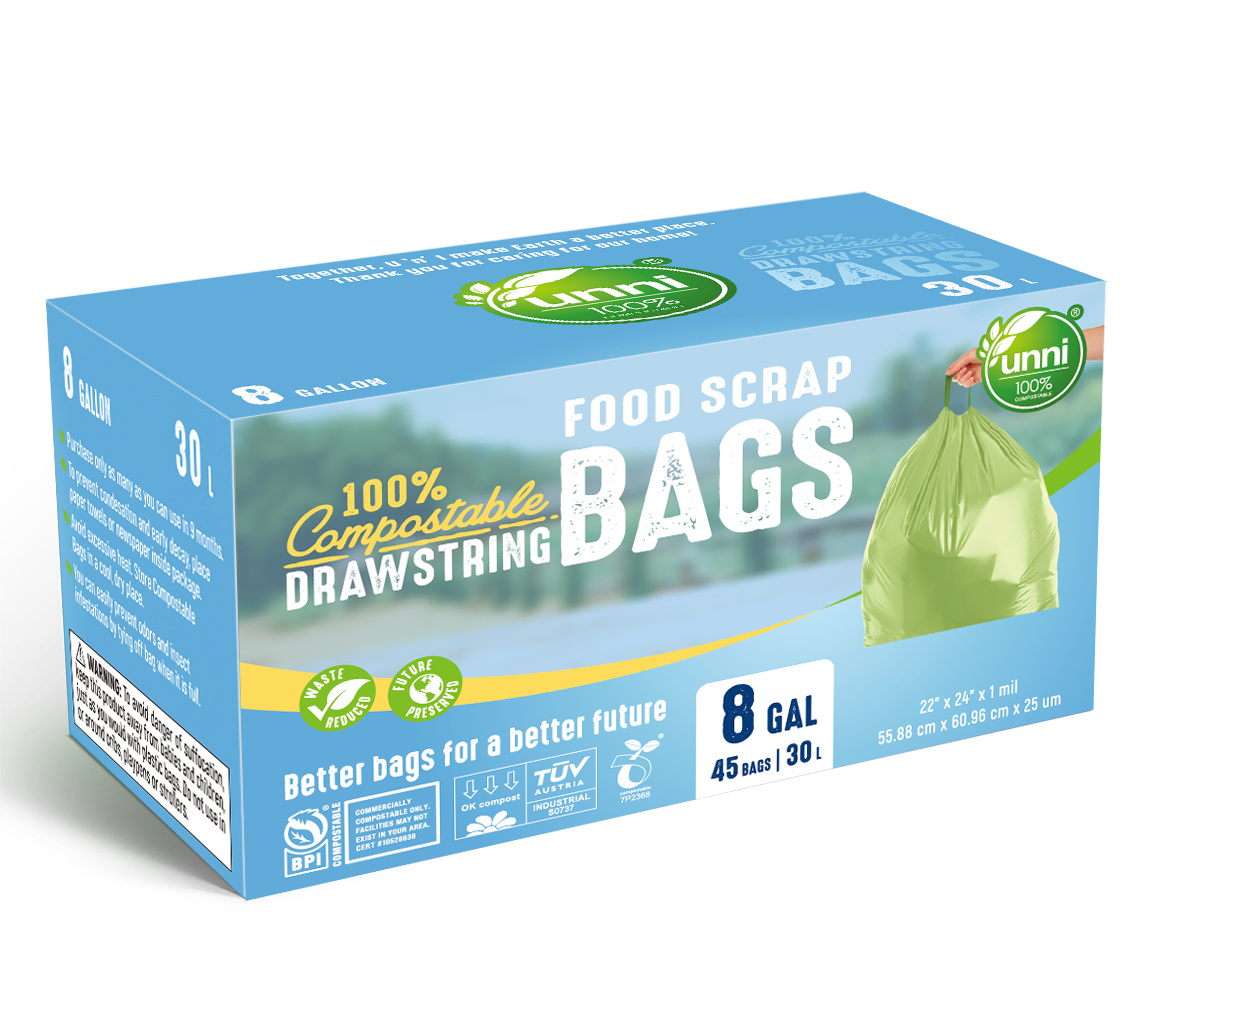 FRANK Extra-Small Organic Mint Scented Compostable Food Waste Bags, 40-pk,  Clear, 10-L